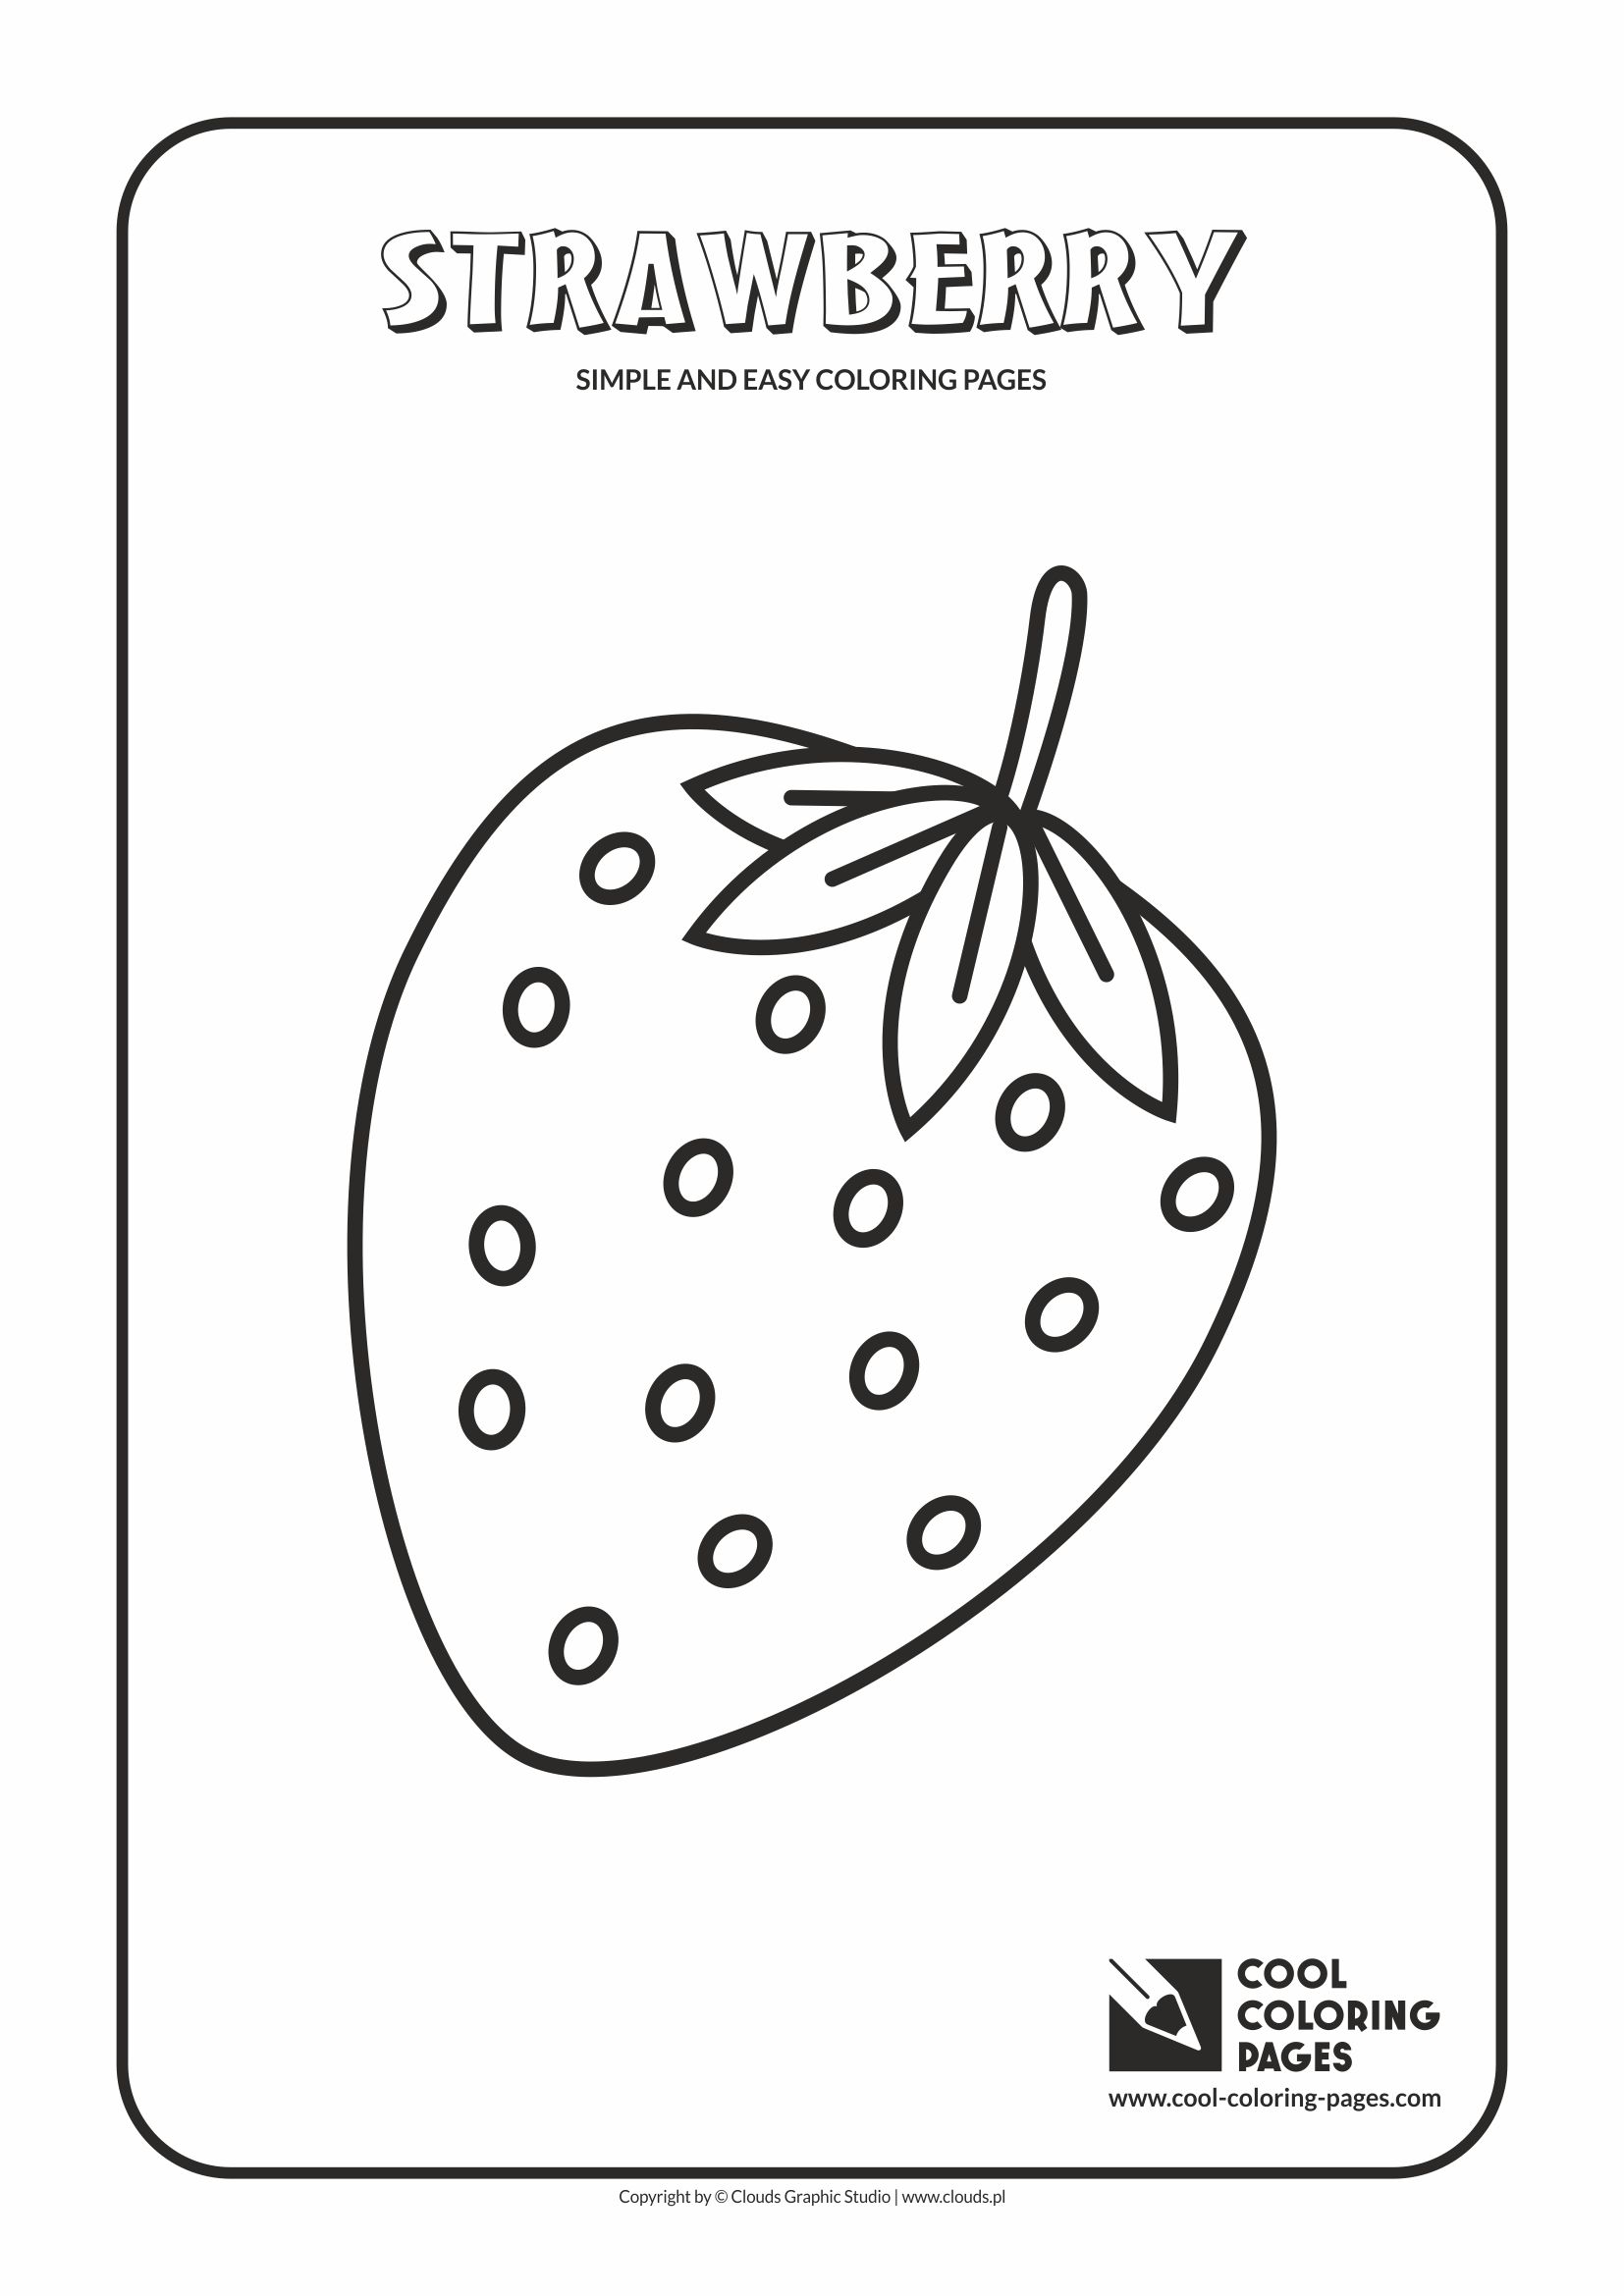 Simple and easy coloring pages for toddlers - Strawberry